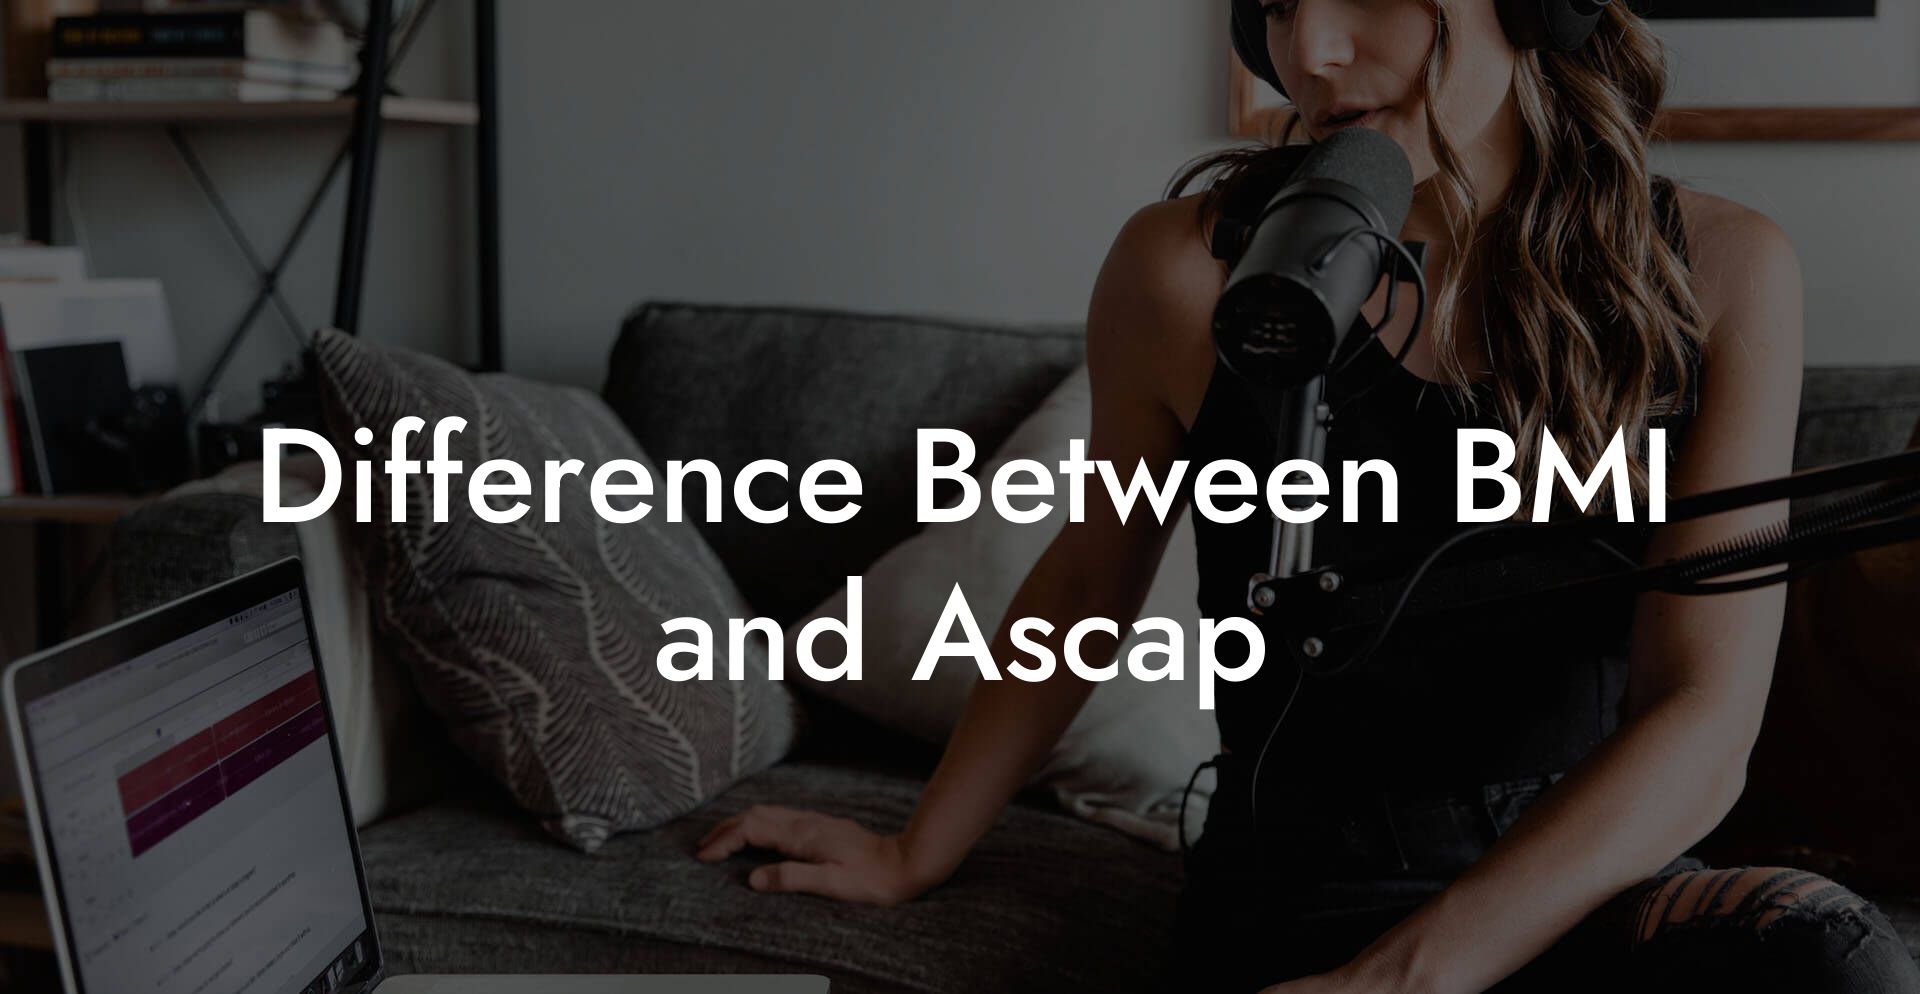 Difference Between BMI and Ascap